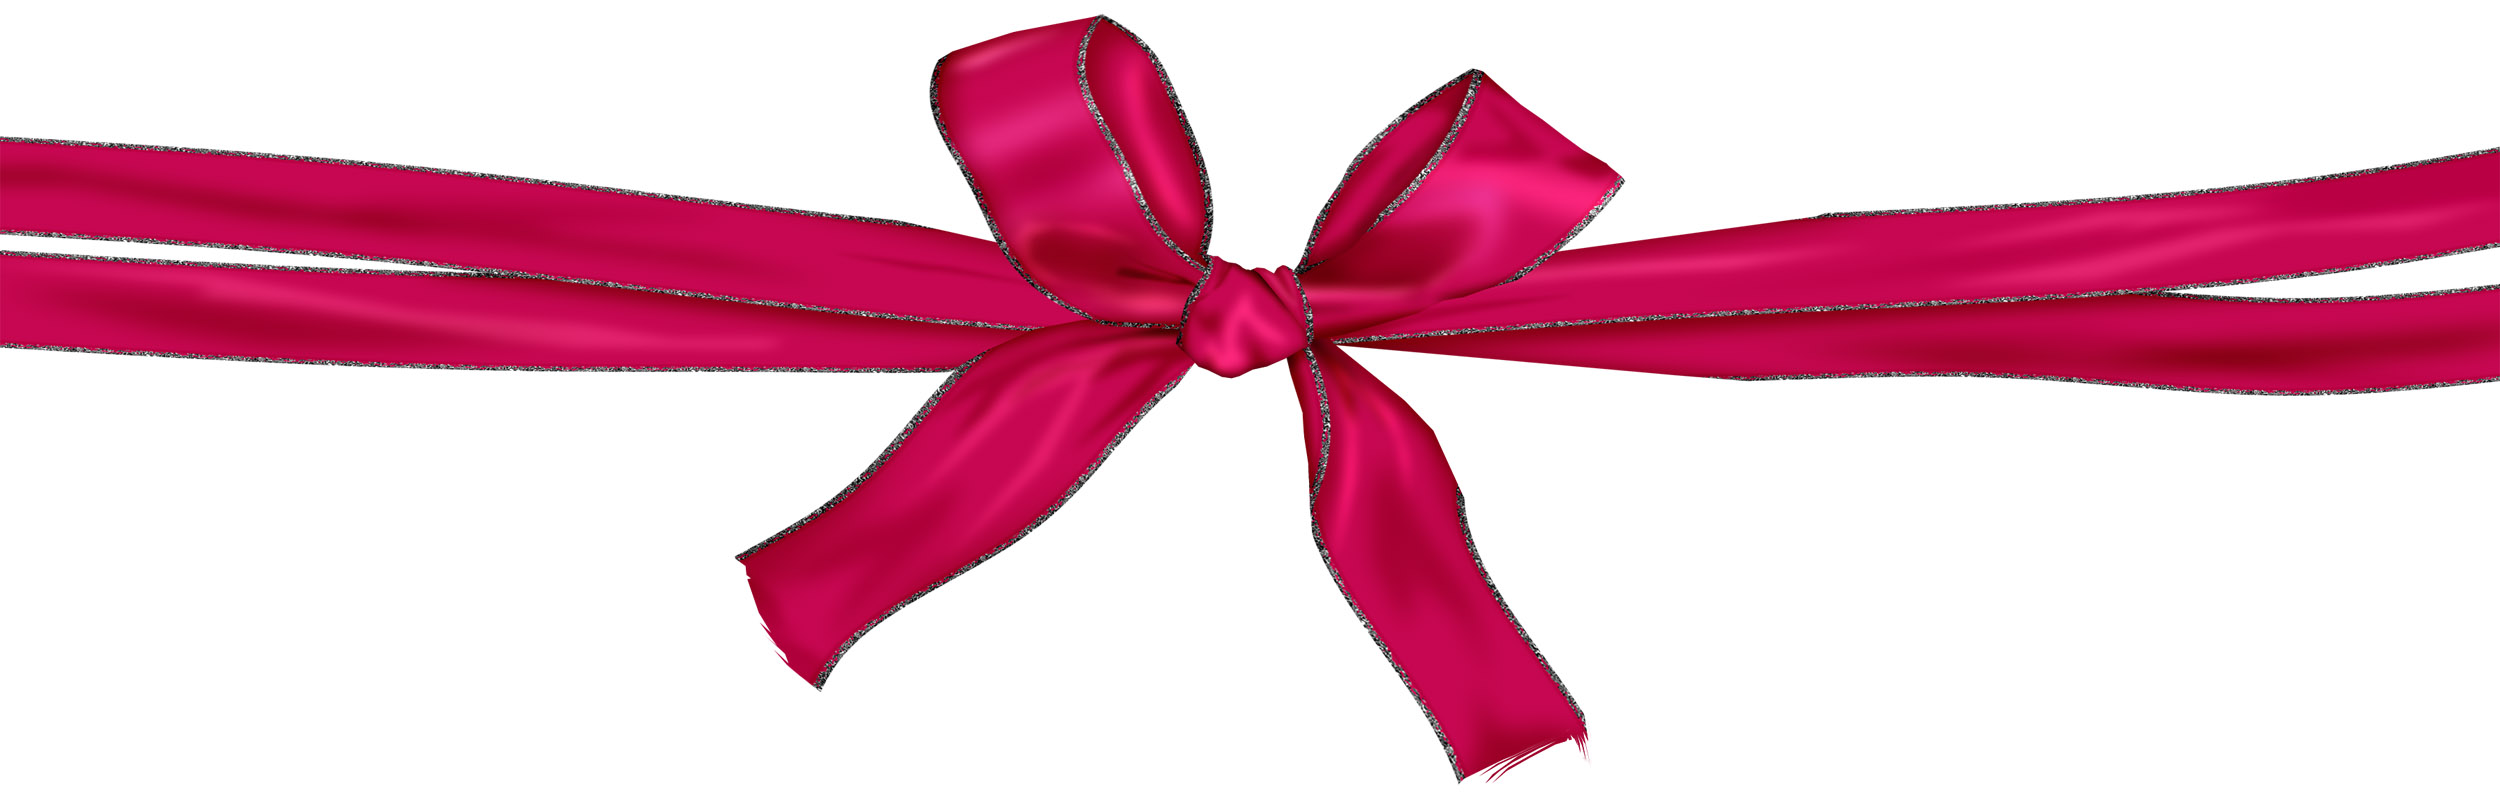 Pink Bow Transparent Clipart